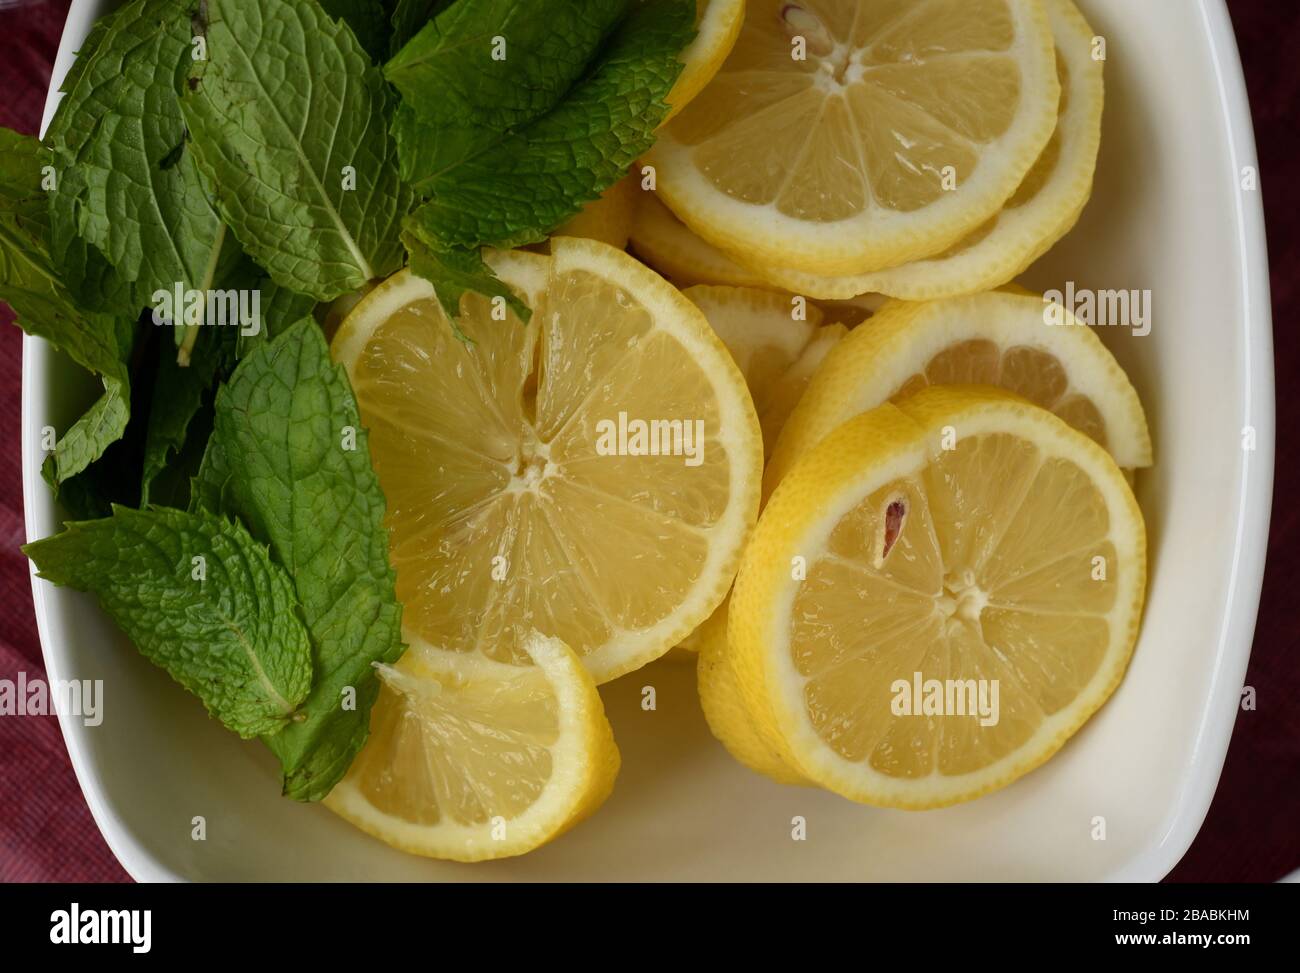 Fresh lemon slices, some with seeds, in a white bowl with mint leaves Stock Photo